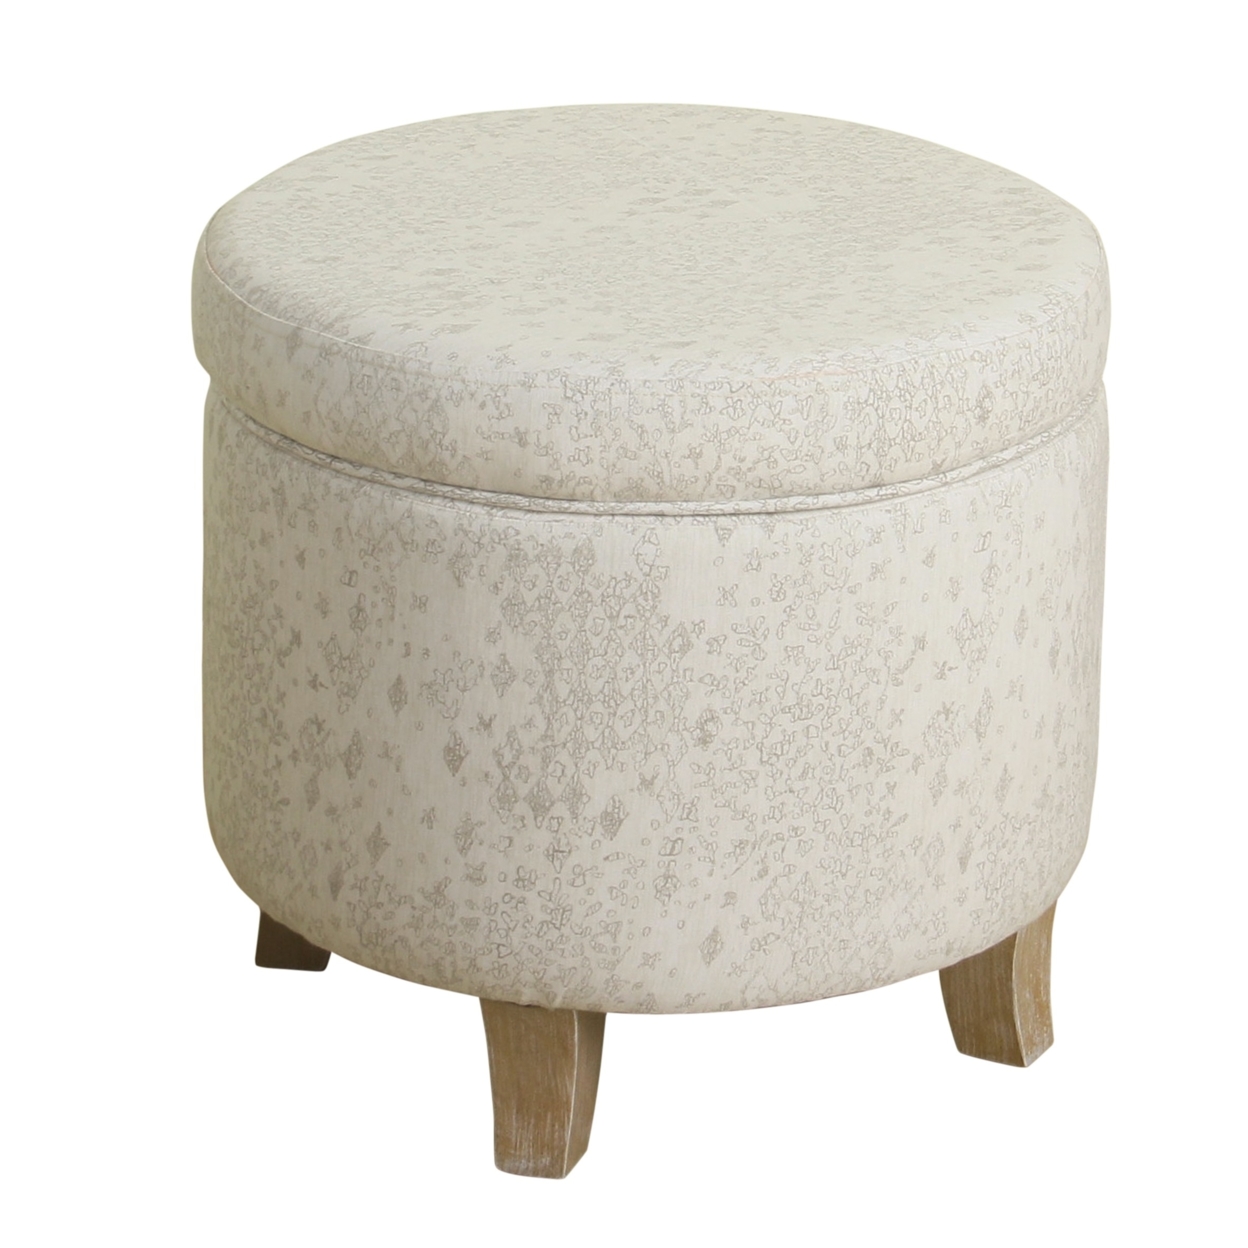 Fabric Upholstered Round Wooden Ottoman With Lift Off Lid Storage, Gray And Brown- Saltoro Sherpi